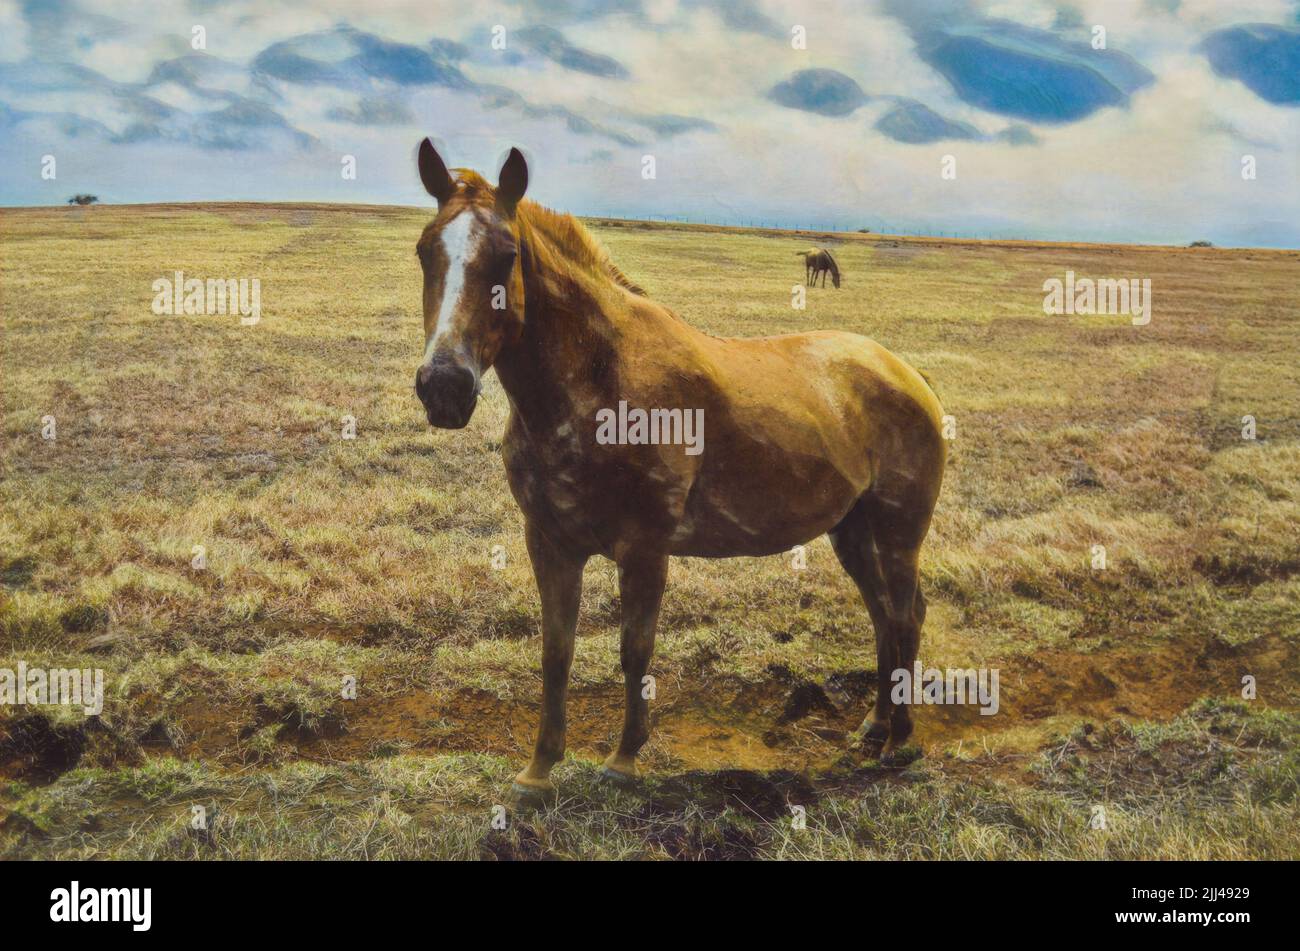 Horse in a dry grassy field on the southernmost part of Mauna Loa, the Big Island of Hawaii.  Edited to create an Illustration from a photo. Stock Photo